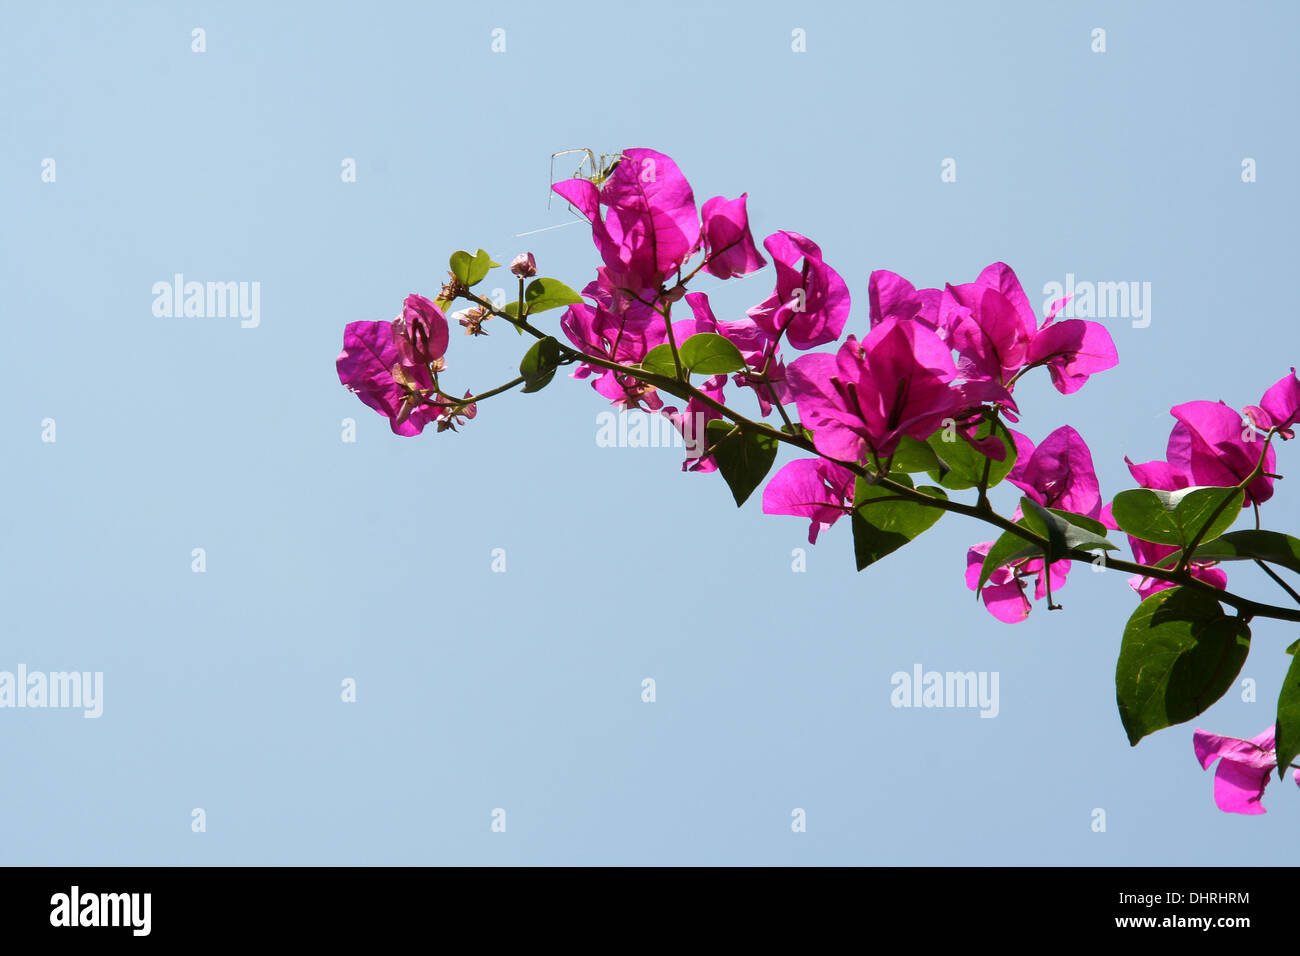 Bunch of pink bougainvillea flowers isolated on blue sky Stock Photo